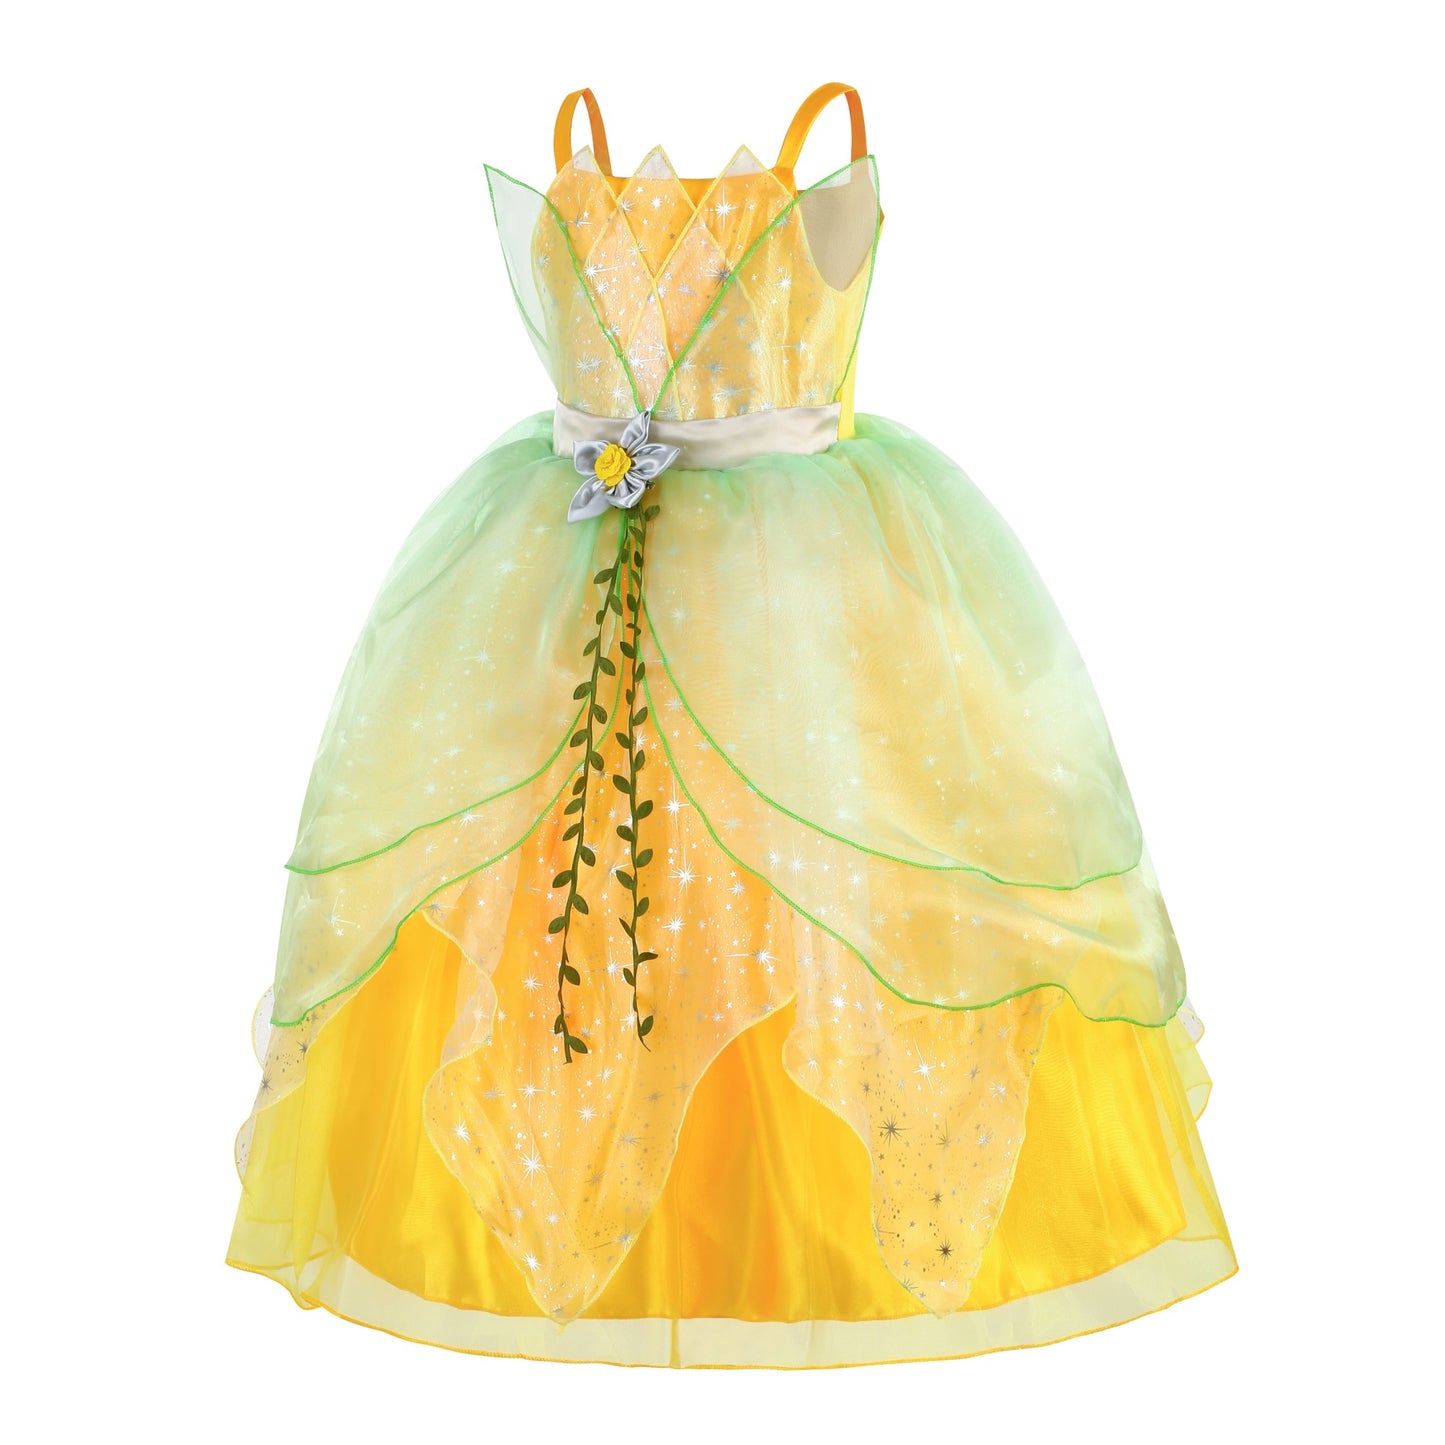 Foierp Costume Princess Dress for Kids with Crown and Wand for Party/Cosplay/Wedding